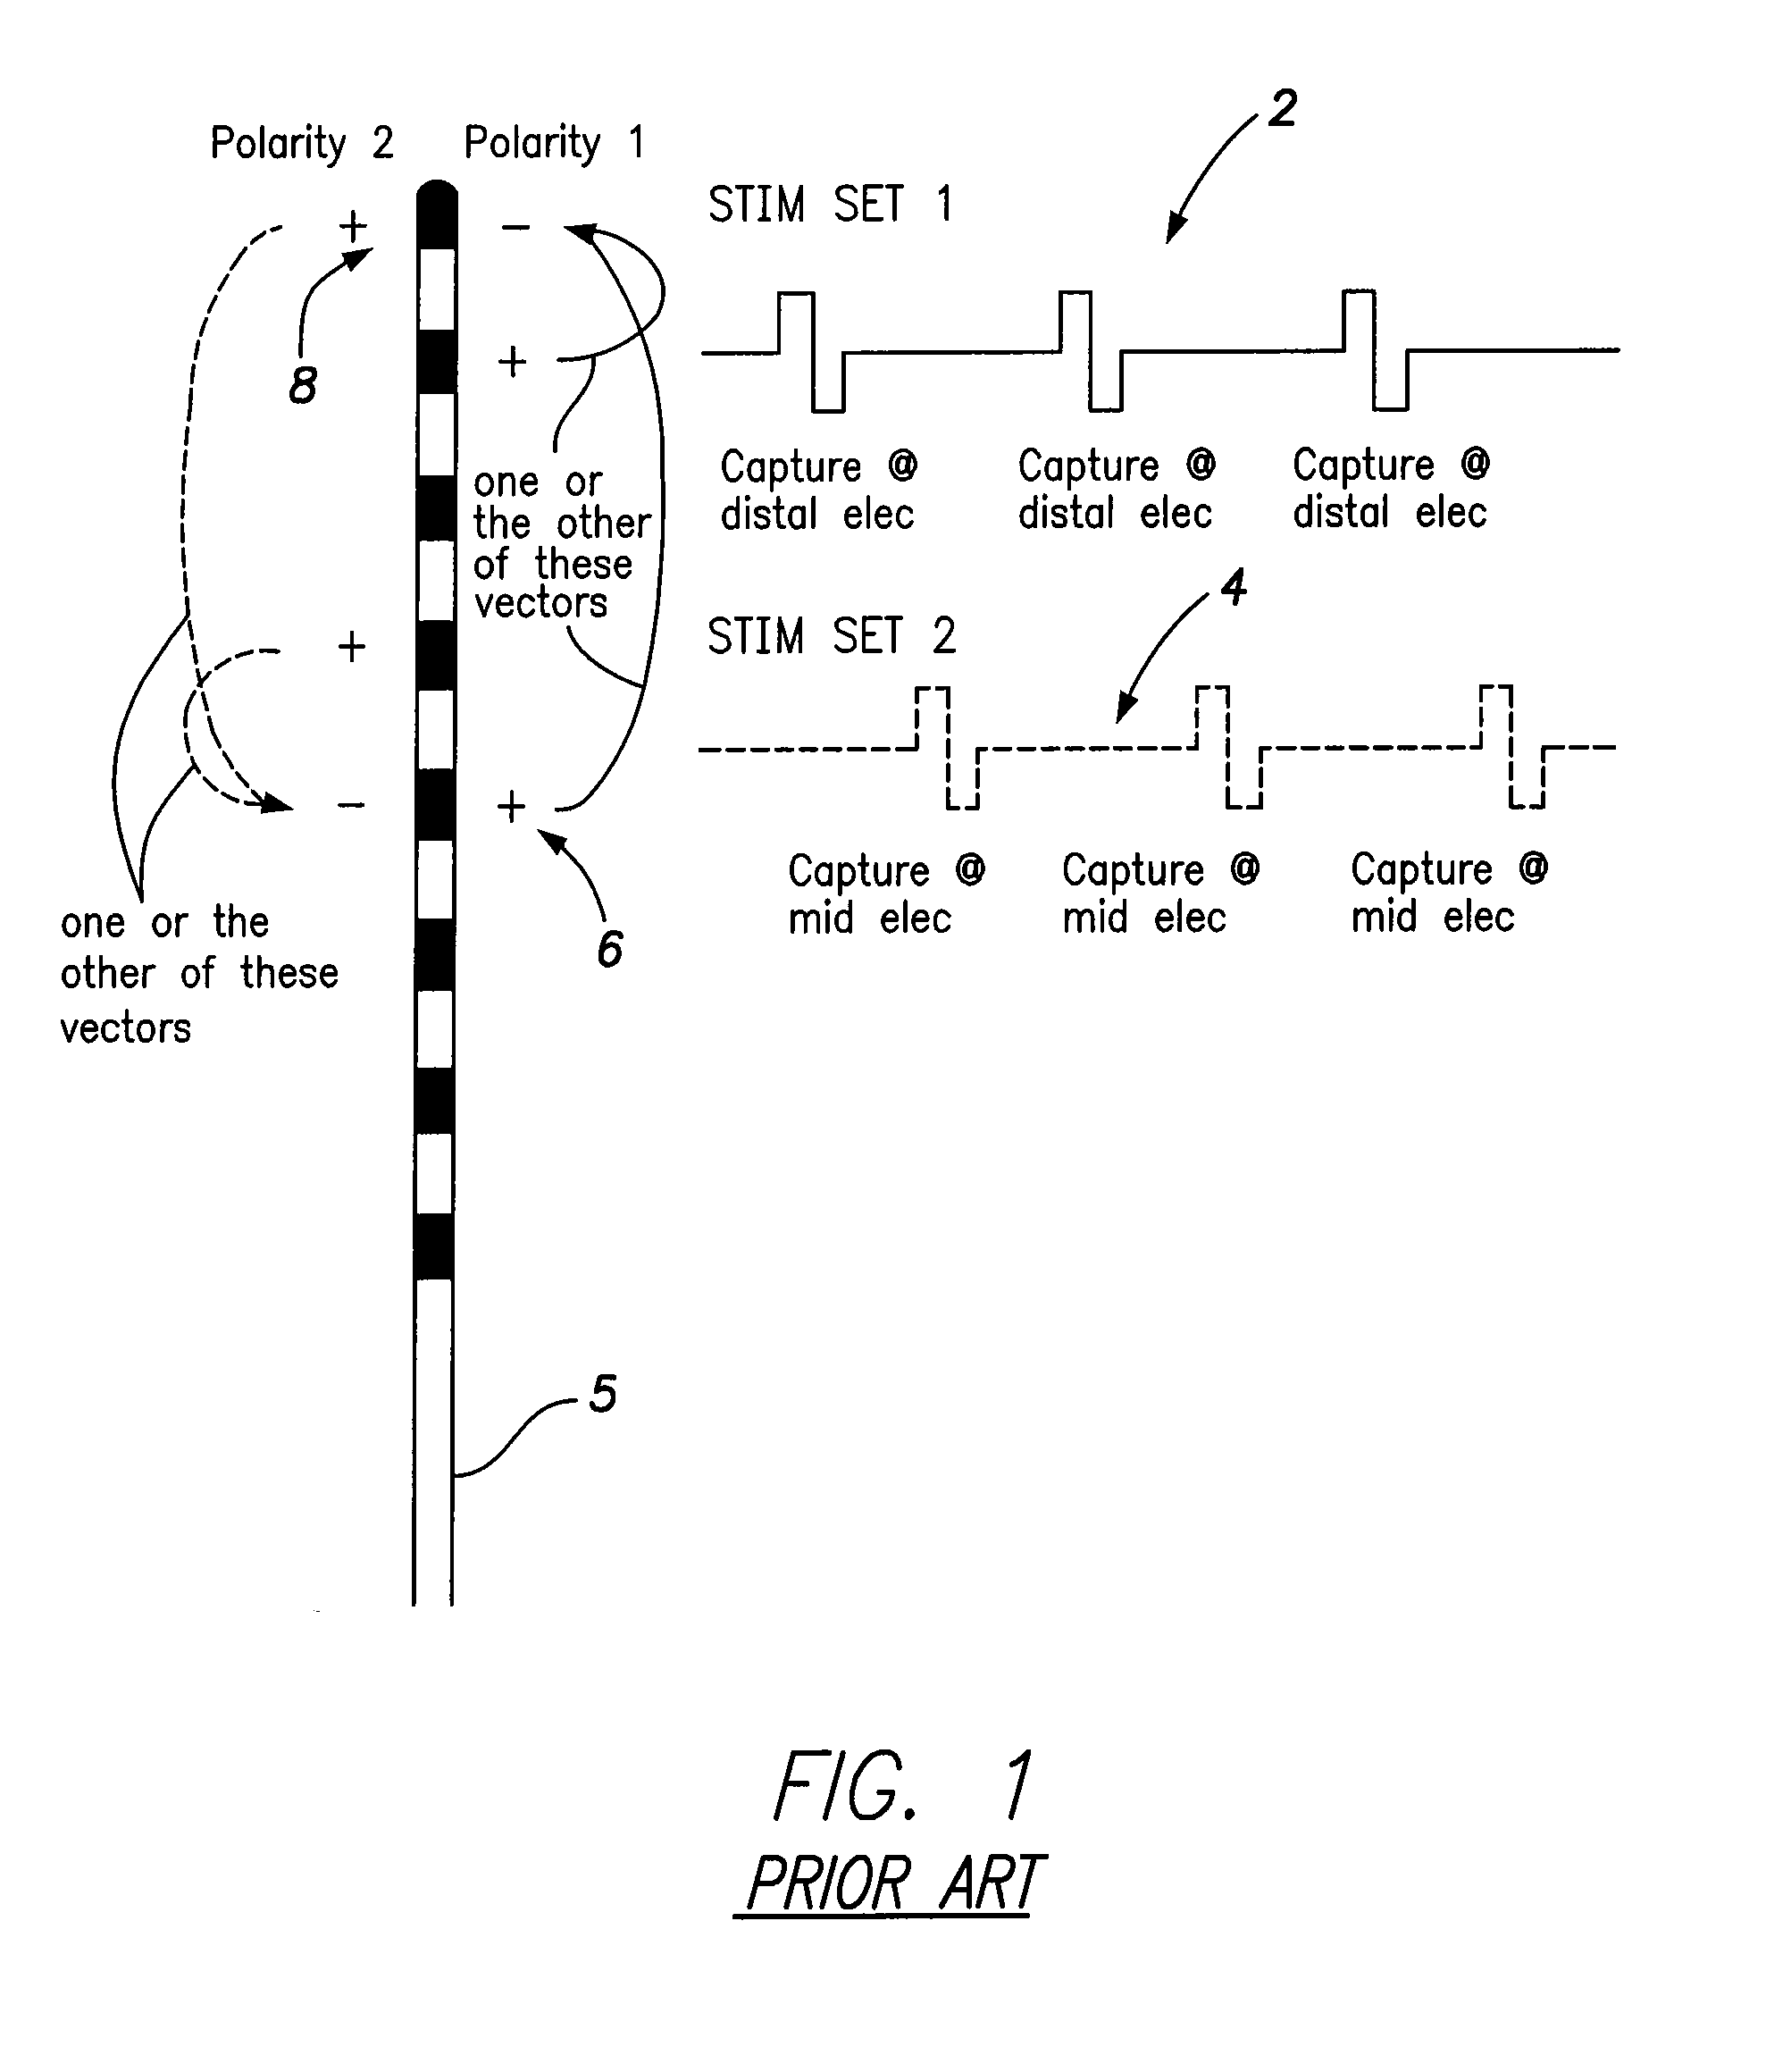 Systems and methods for providing a distributed virtual stimulation cathode for use with an implantable neurostimulation system